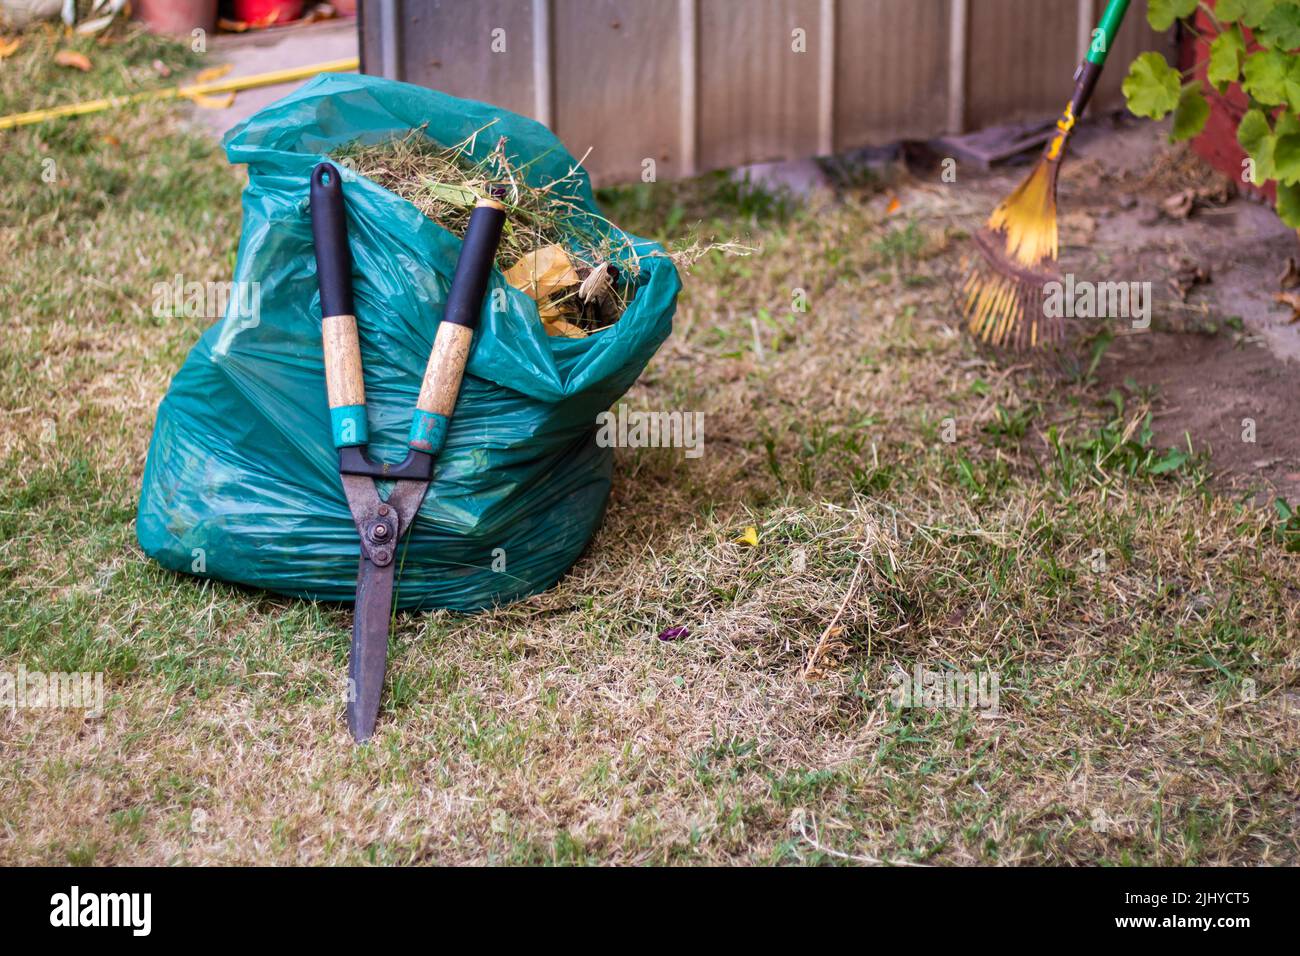 Home gardening. Grass shears leaning on a plastic bag full of grass. Stock Photo